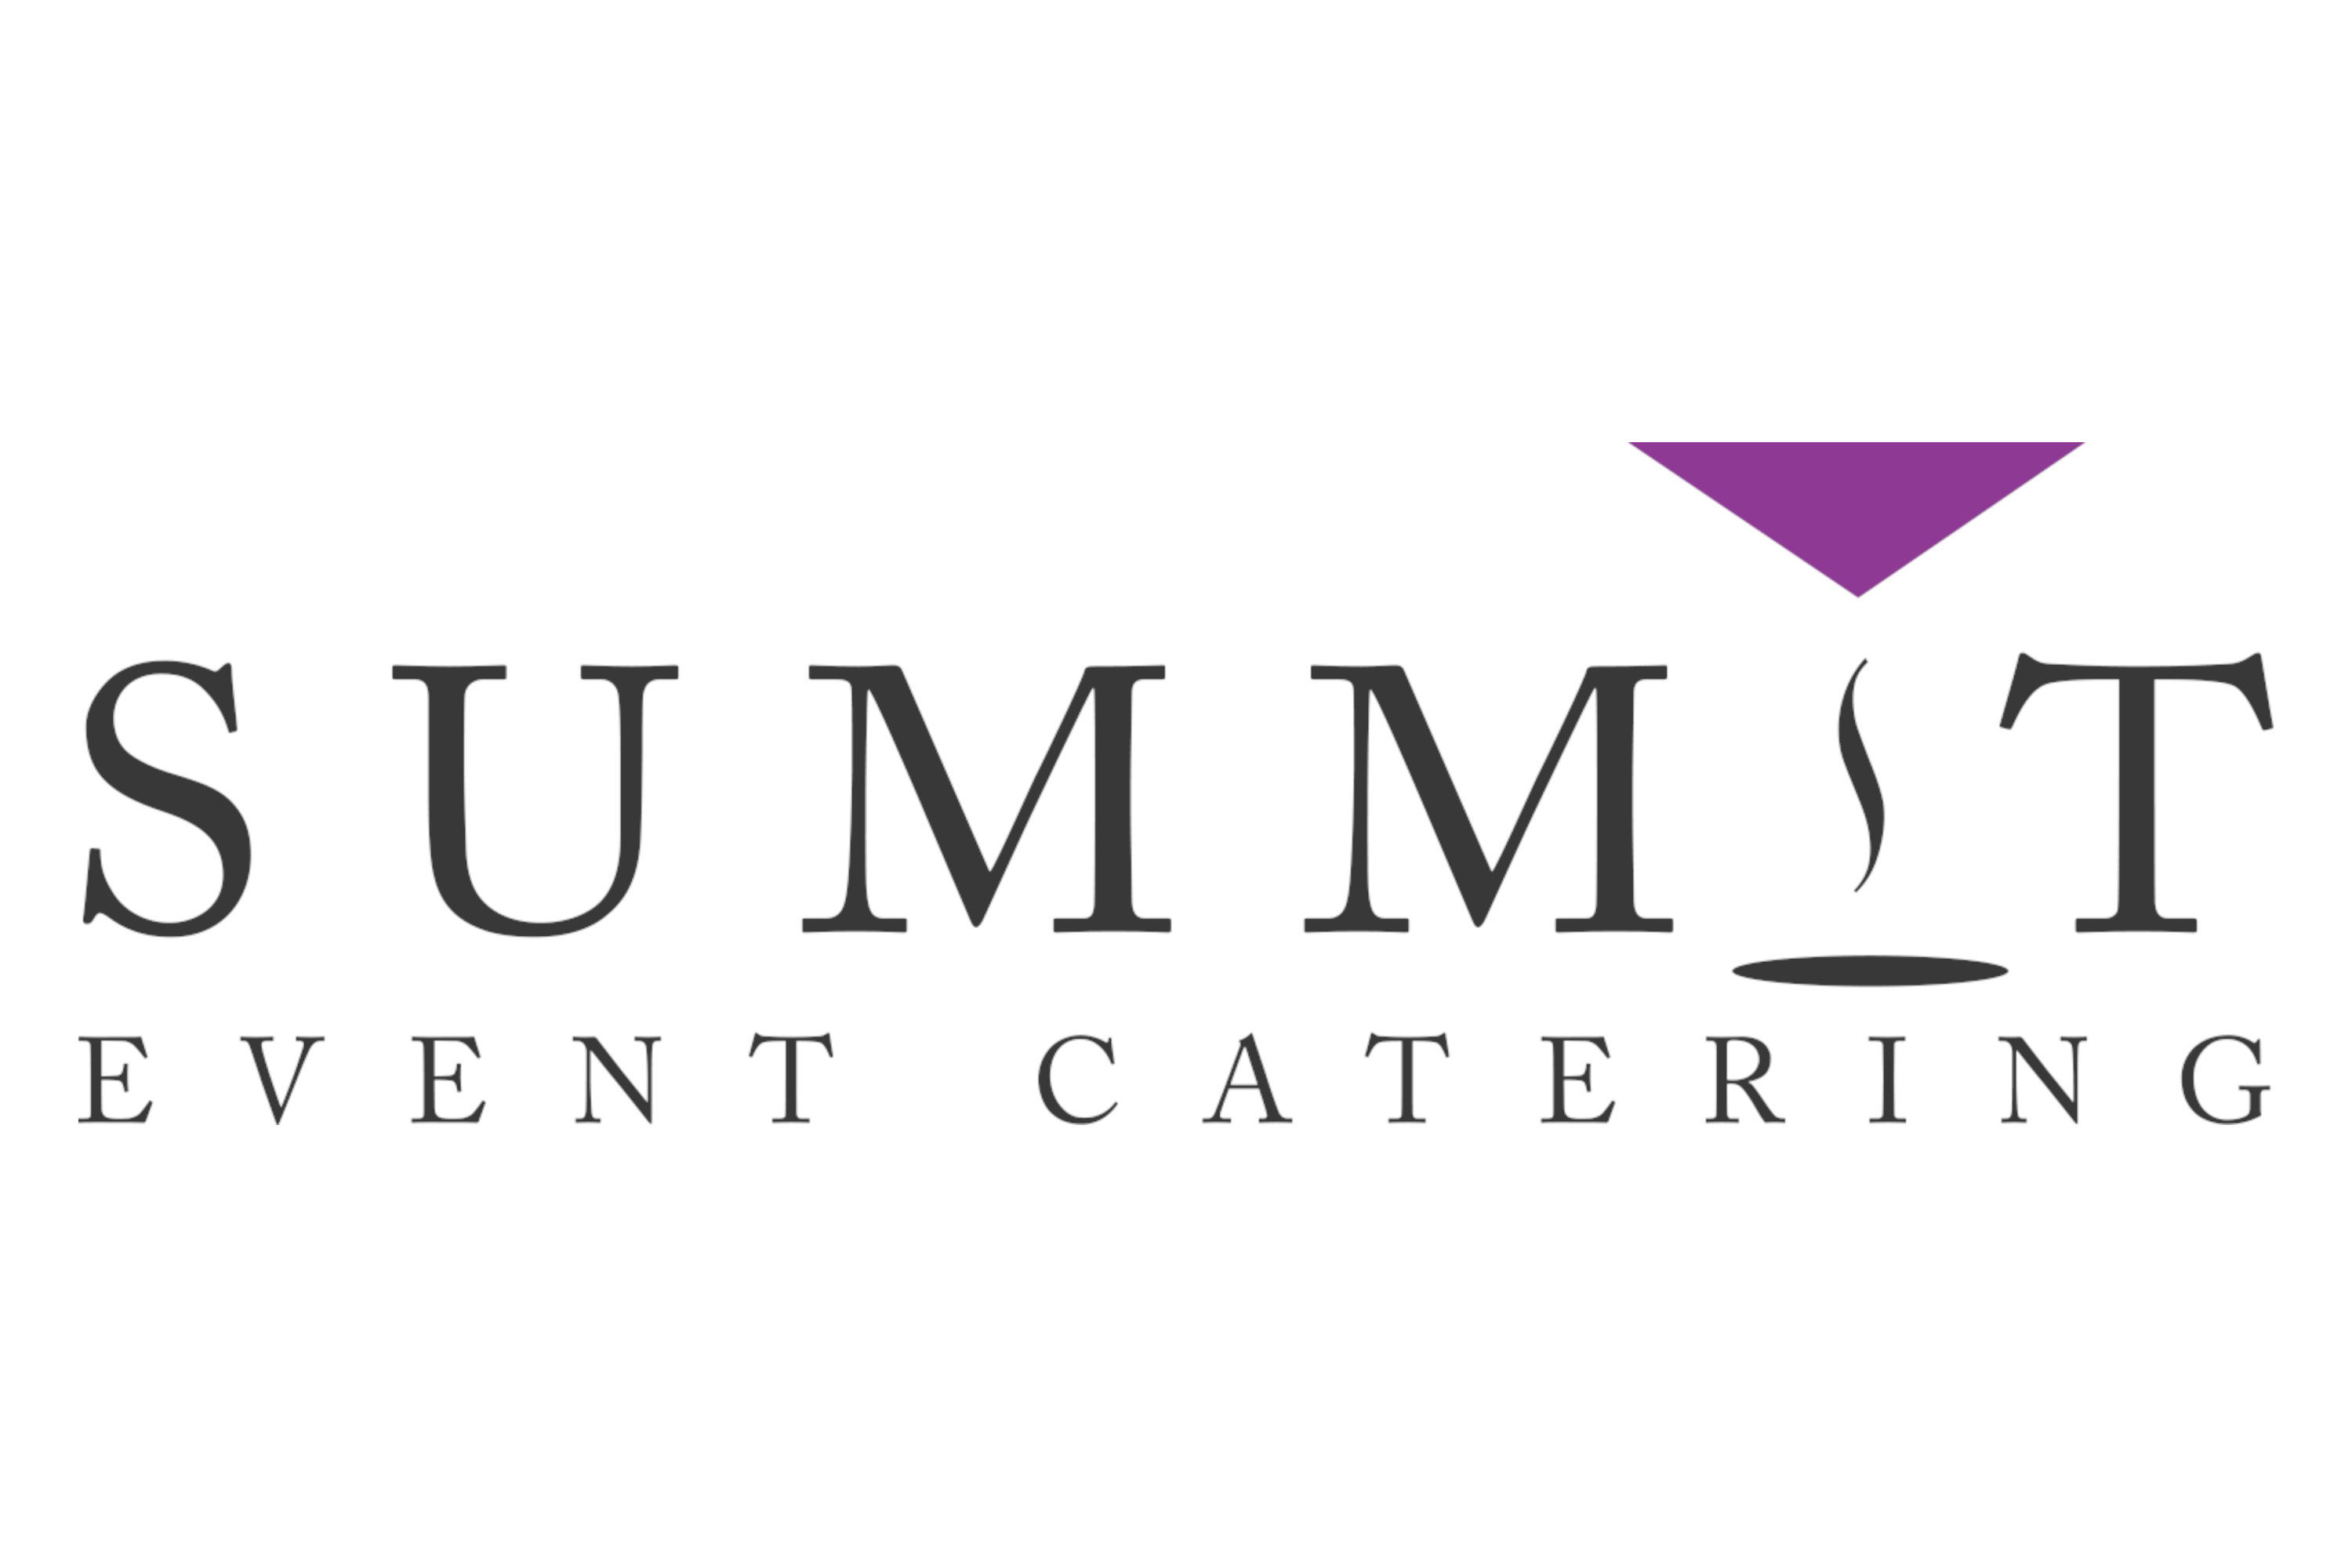 Summit Event Catering Logo - Logo reads "Summit Event Catering" with 'i' substituted with purple and black martini glass illustration 